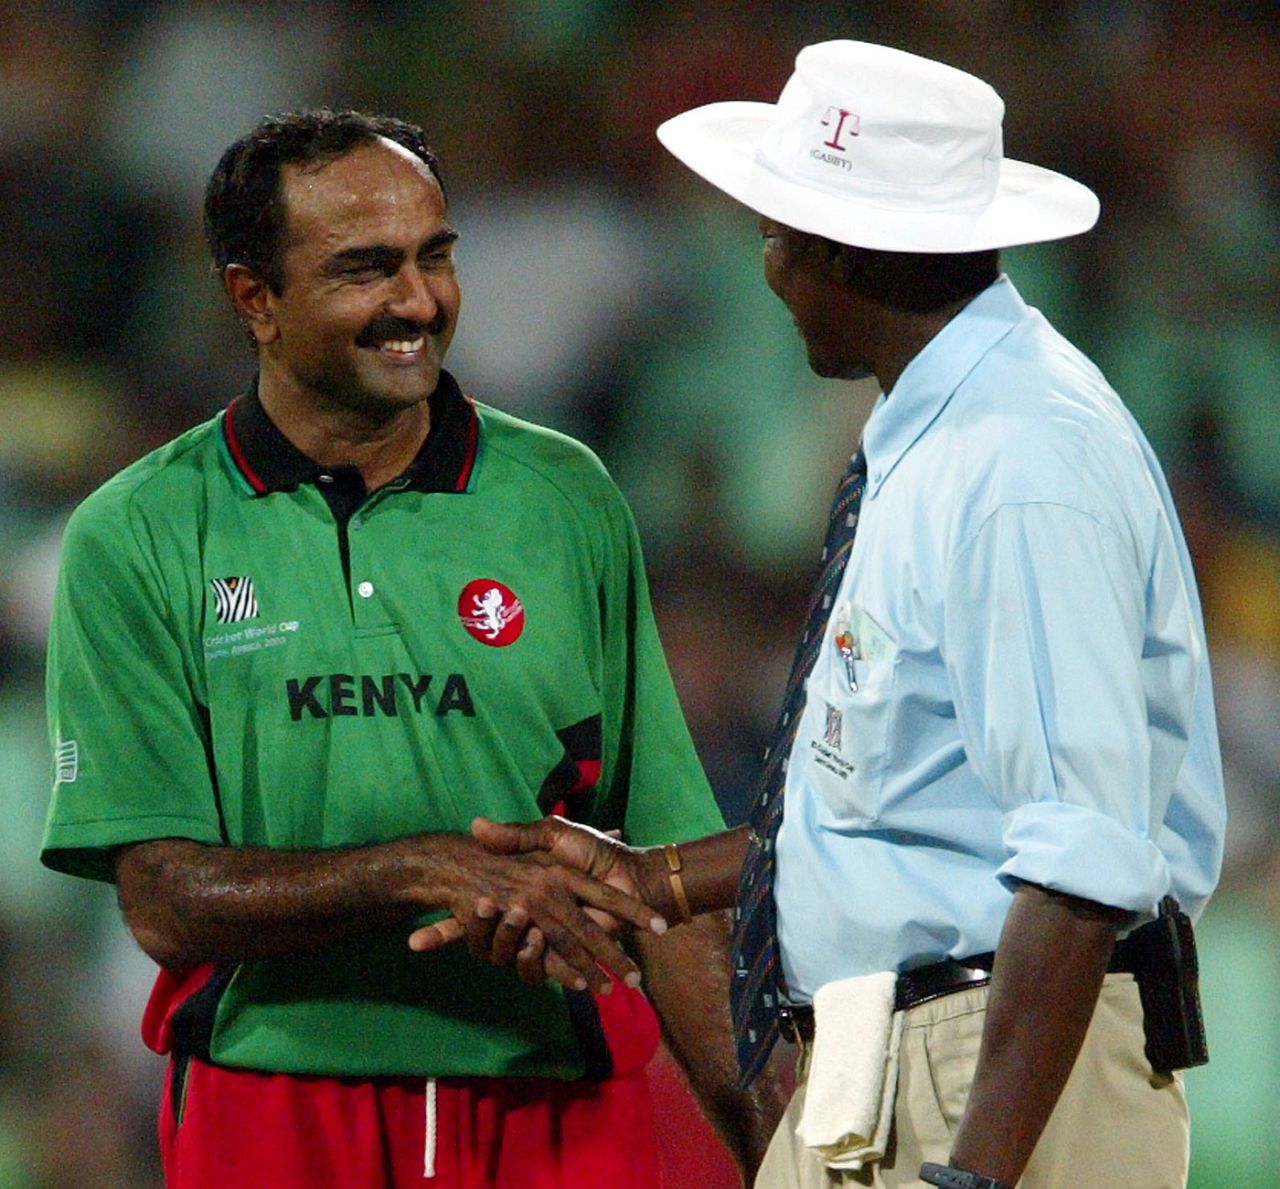 Aasif Karim is congratulated by Steve Bucknor after his spell, Kenya v Australia, World Cup, Durban, March 15, 2003